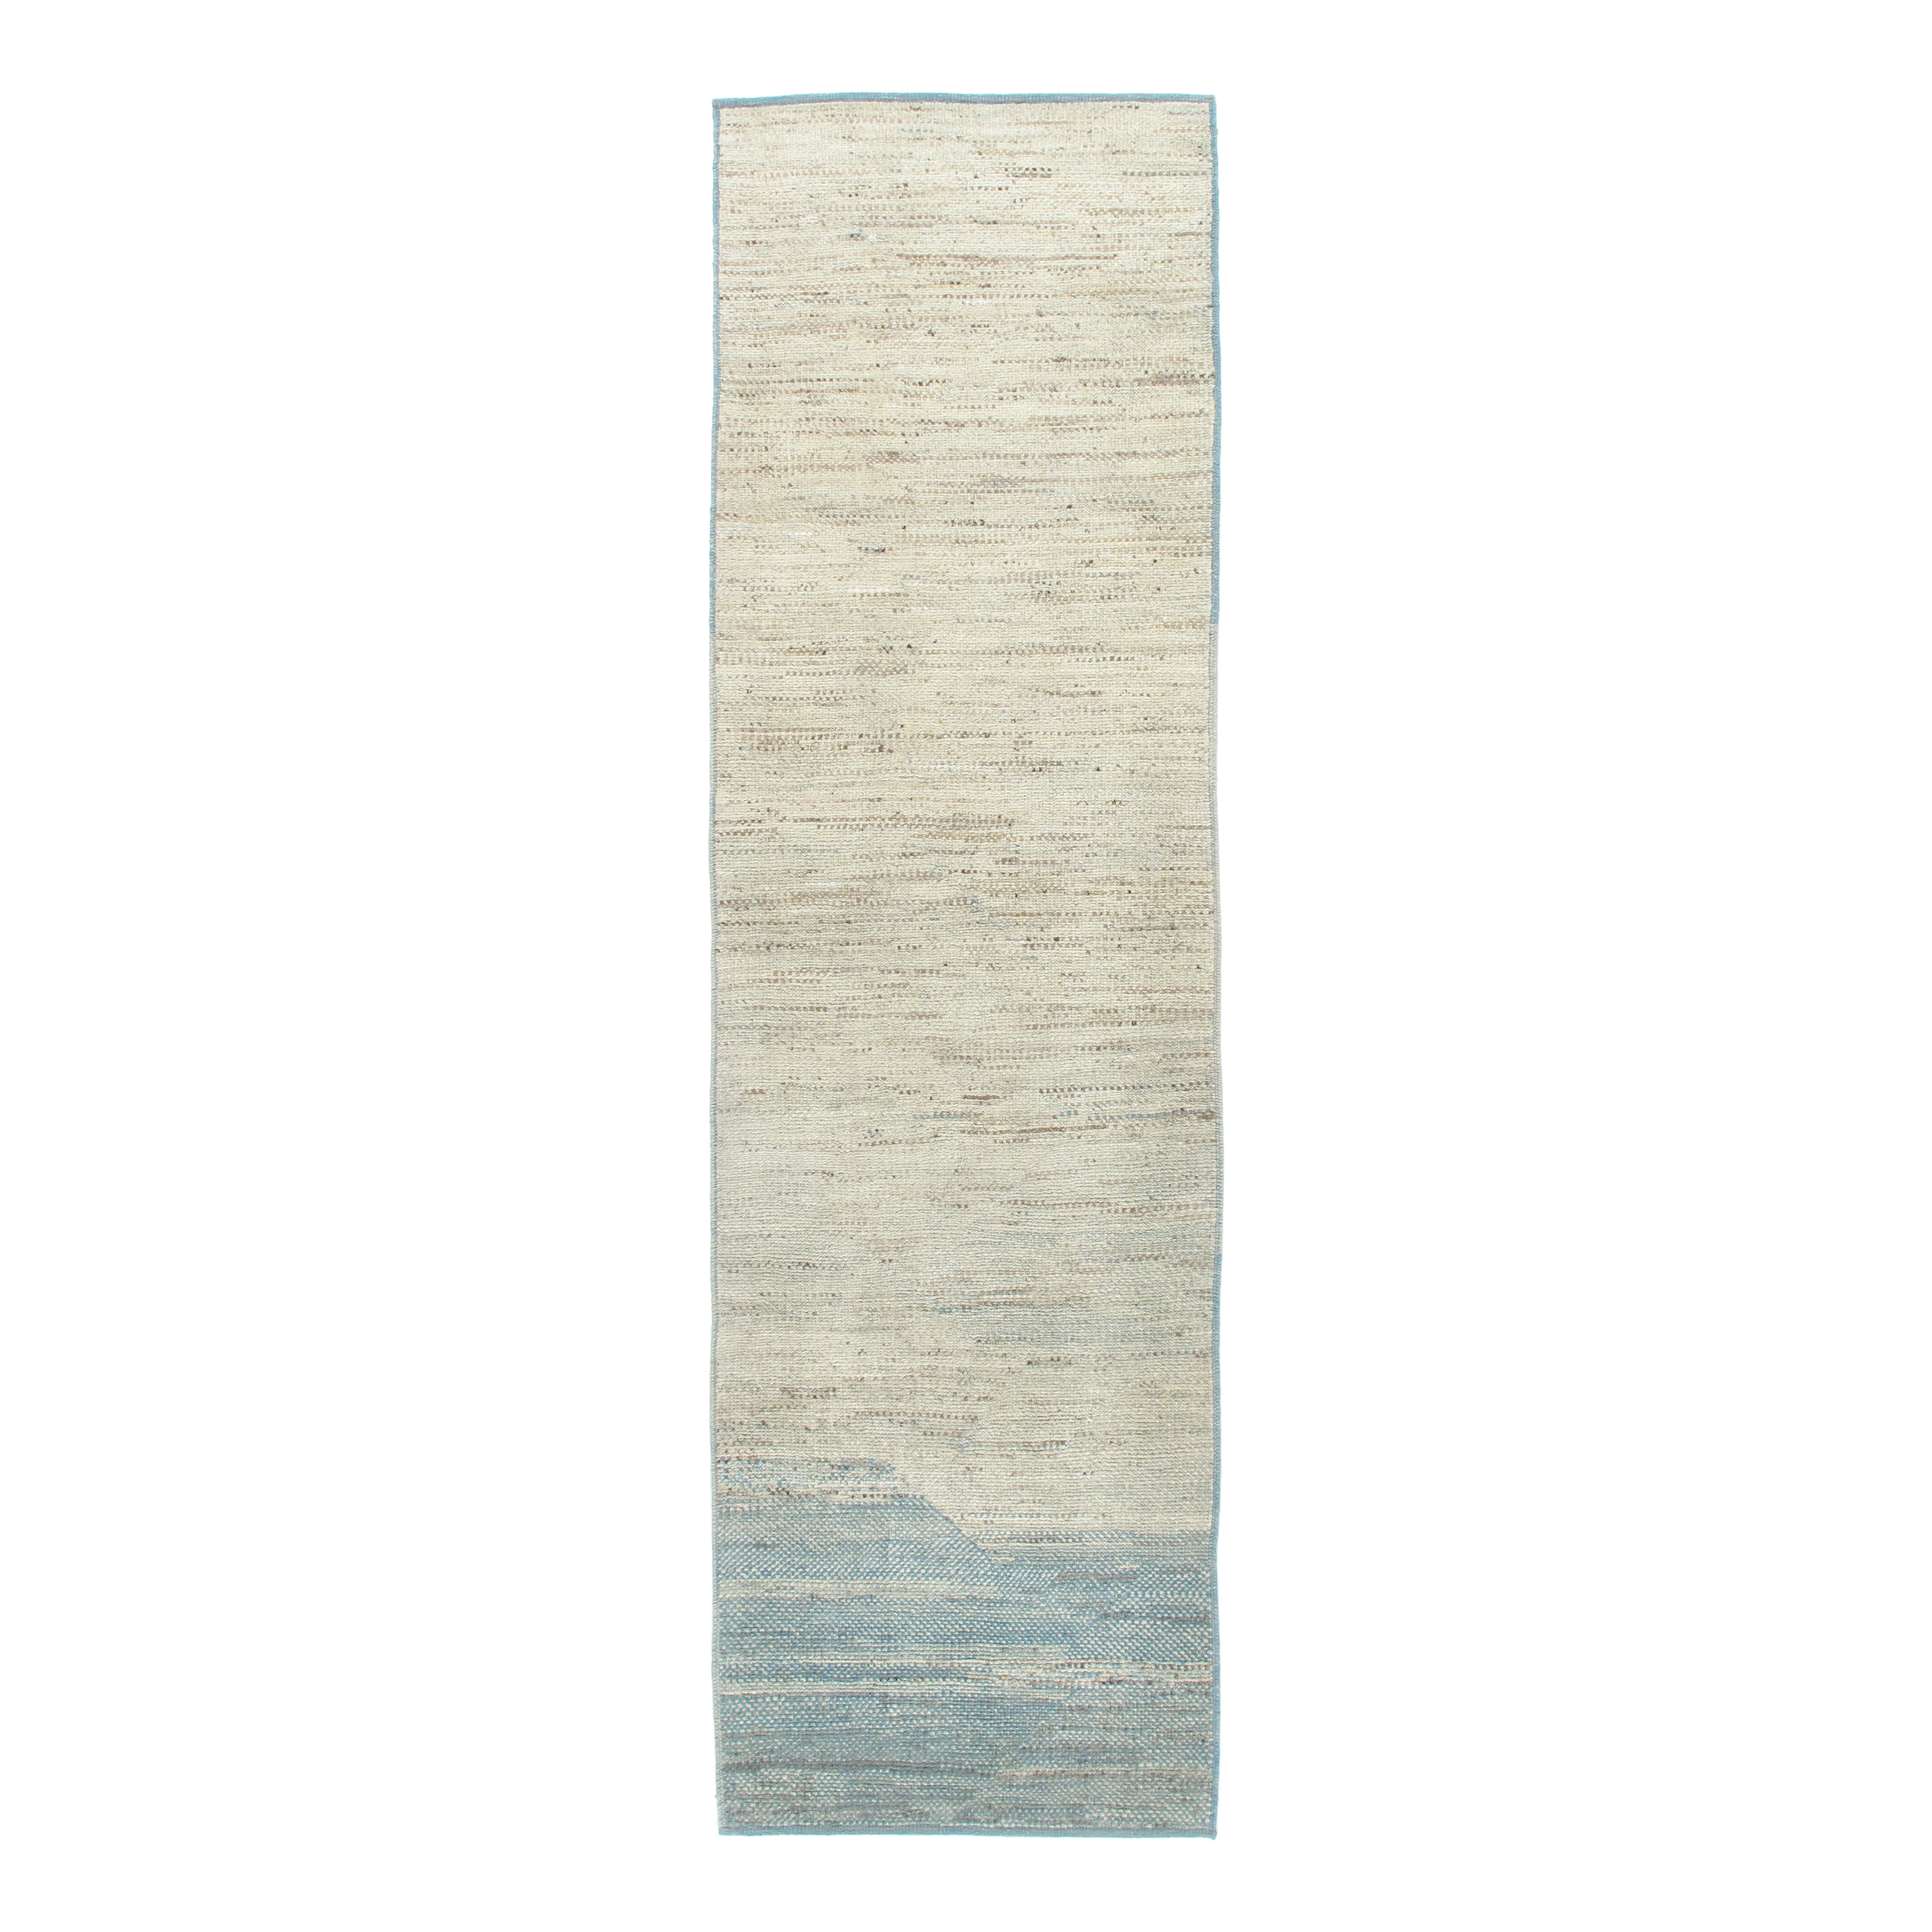 Sahara rug is a hand-knotted transitional piece made from naturally dyed wool. 